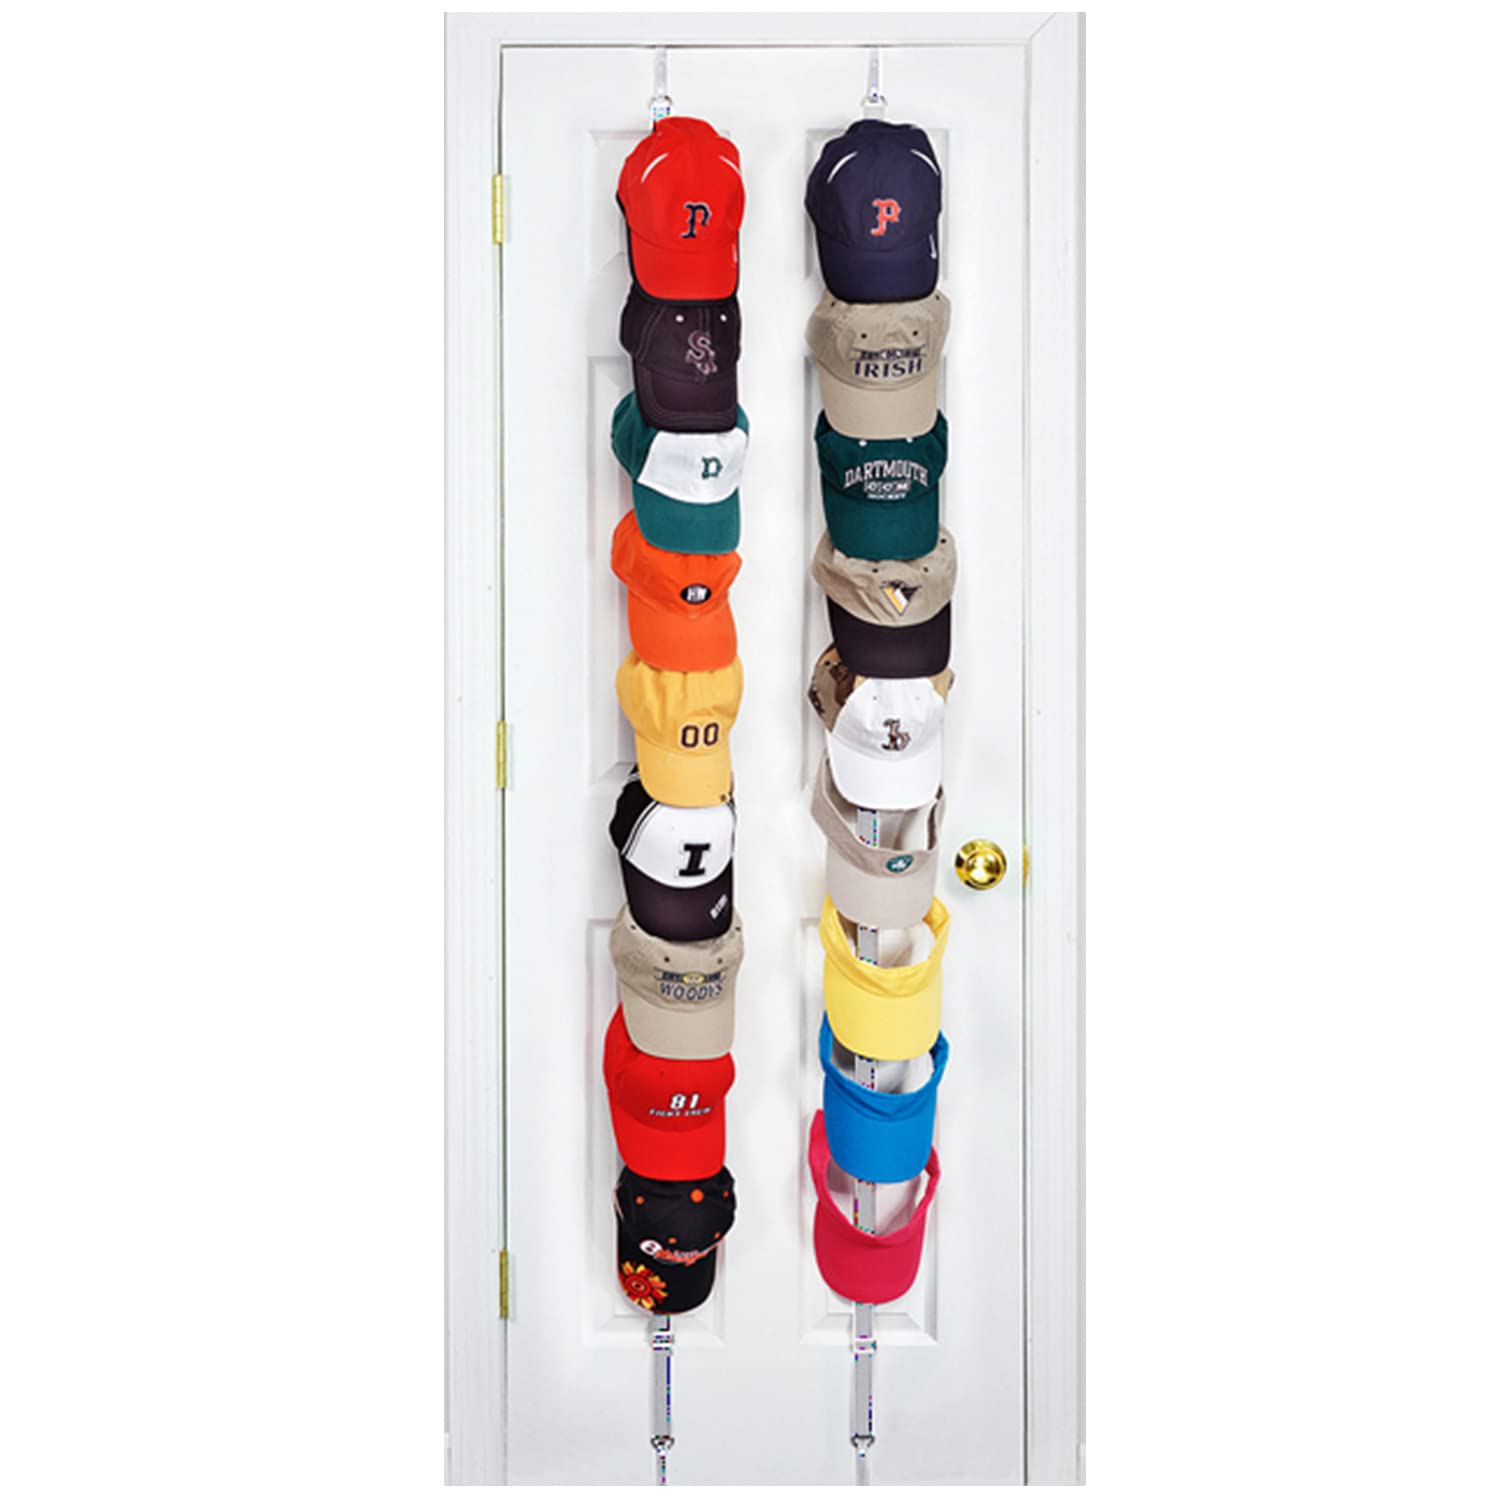 Perfect Curve CapRack18 Over-The-Door Hat Rack and Organizer |Baseball Cap Rack |Hat Rack Stand |Over The Door Hat Rack |Hat Rack for Door |Hat Rack for Closet |Two Straps |Holds Up to 18 Caps |Black